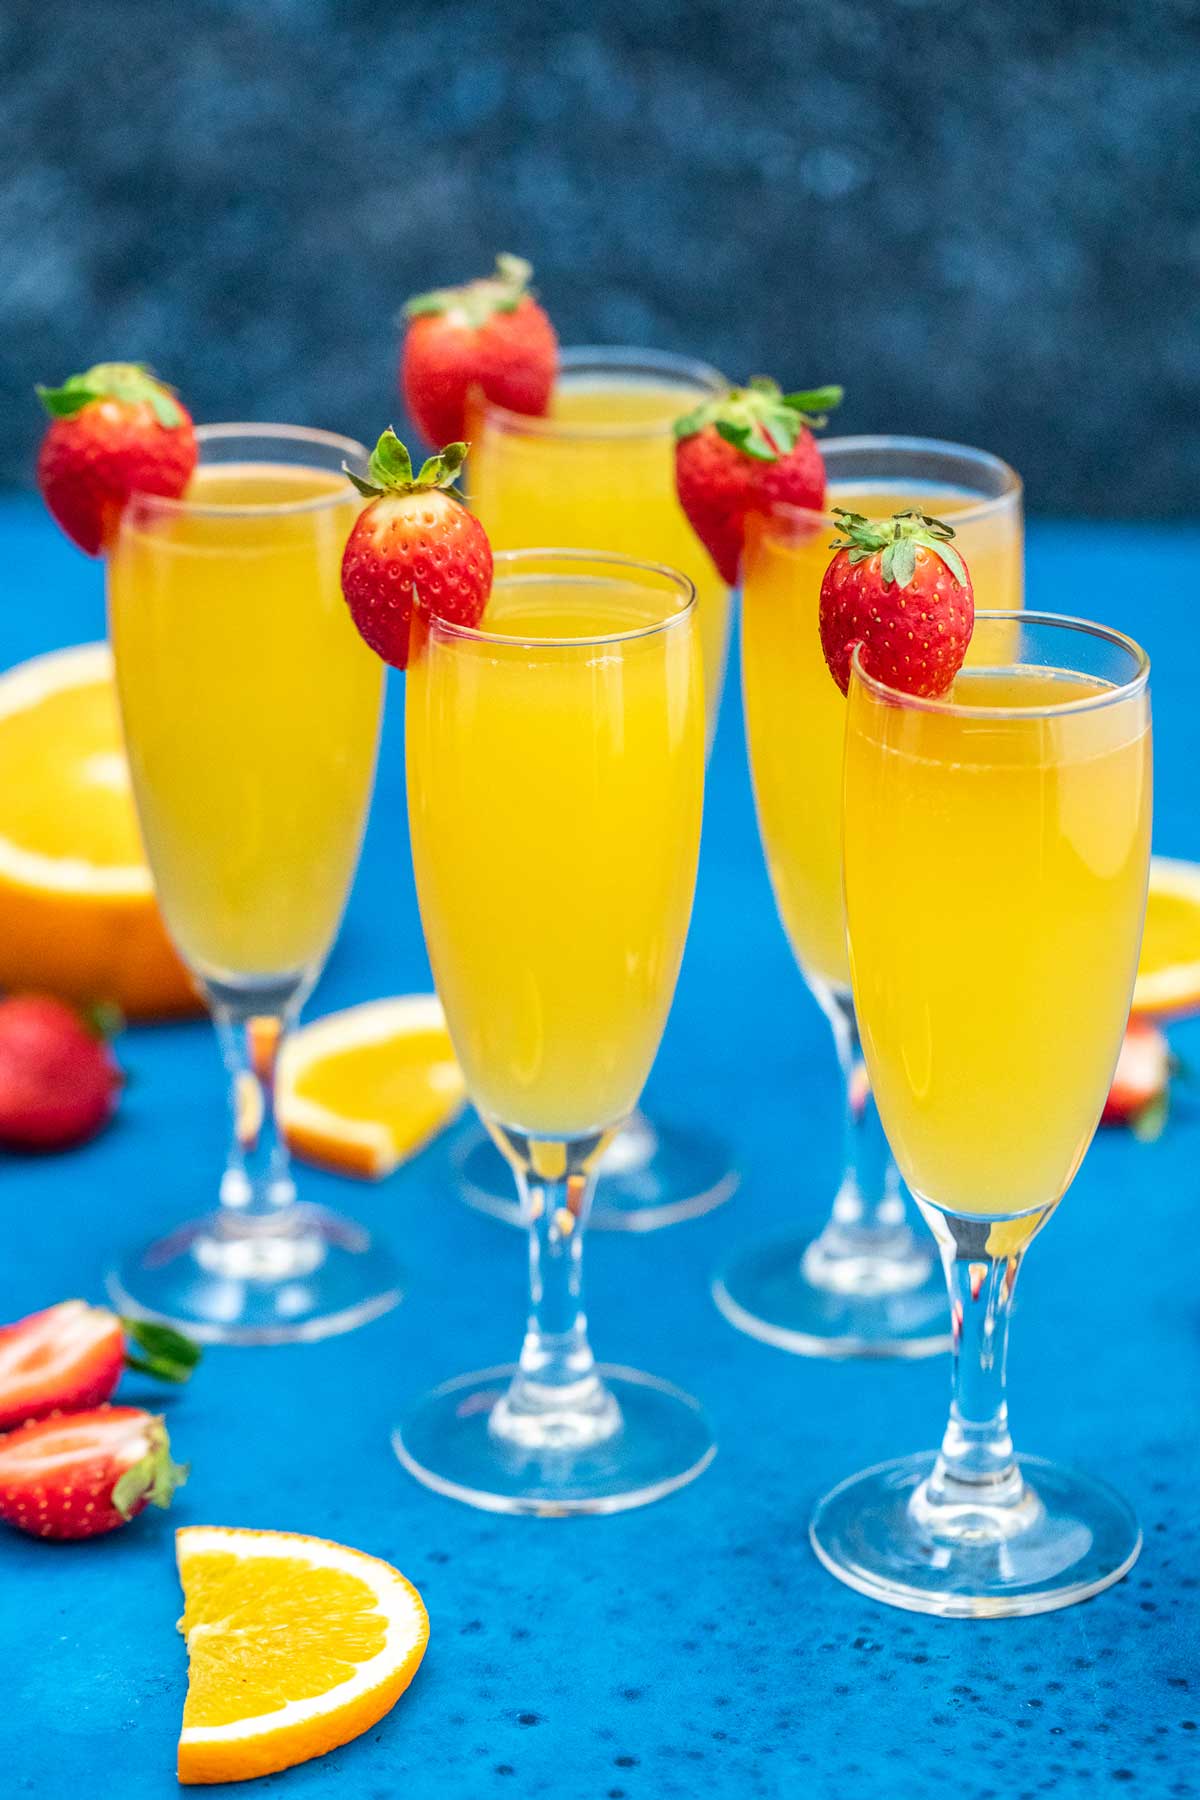 National Mimosa Day in May 16th! Let’s Celebrate!!!